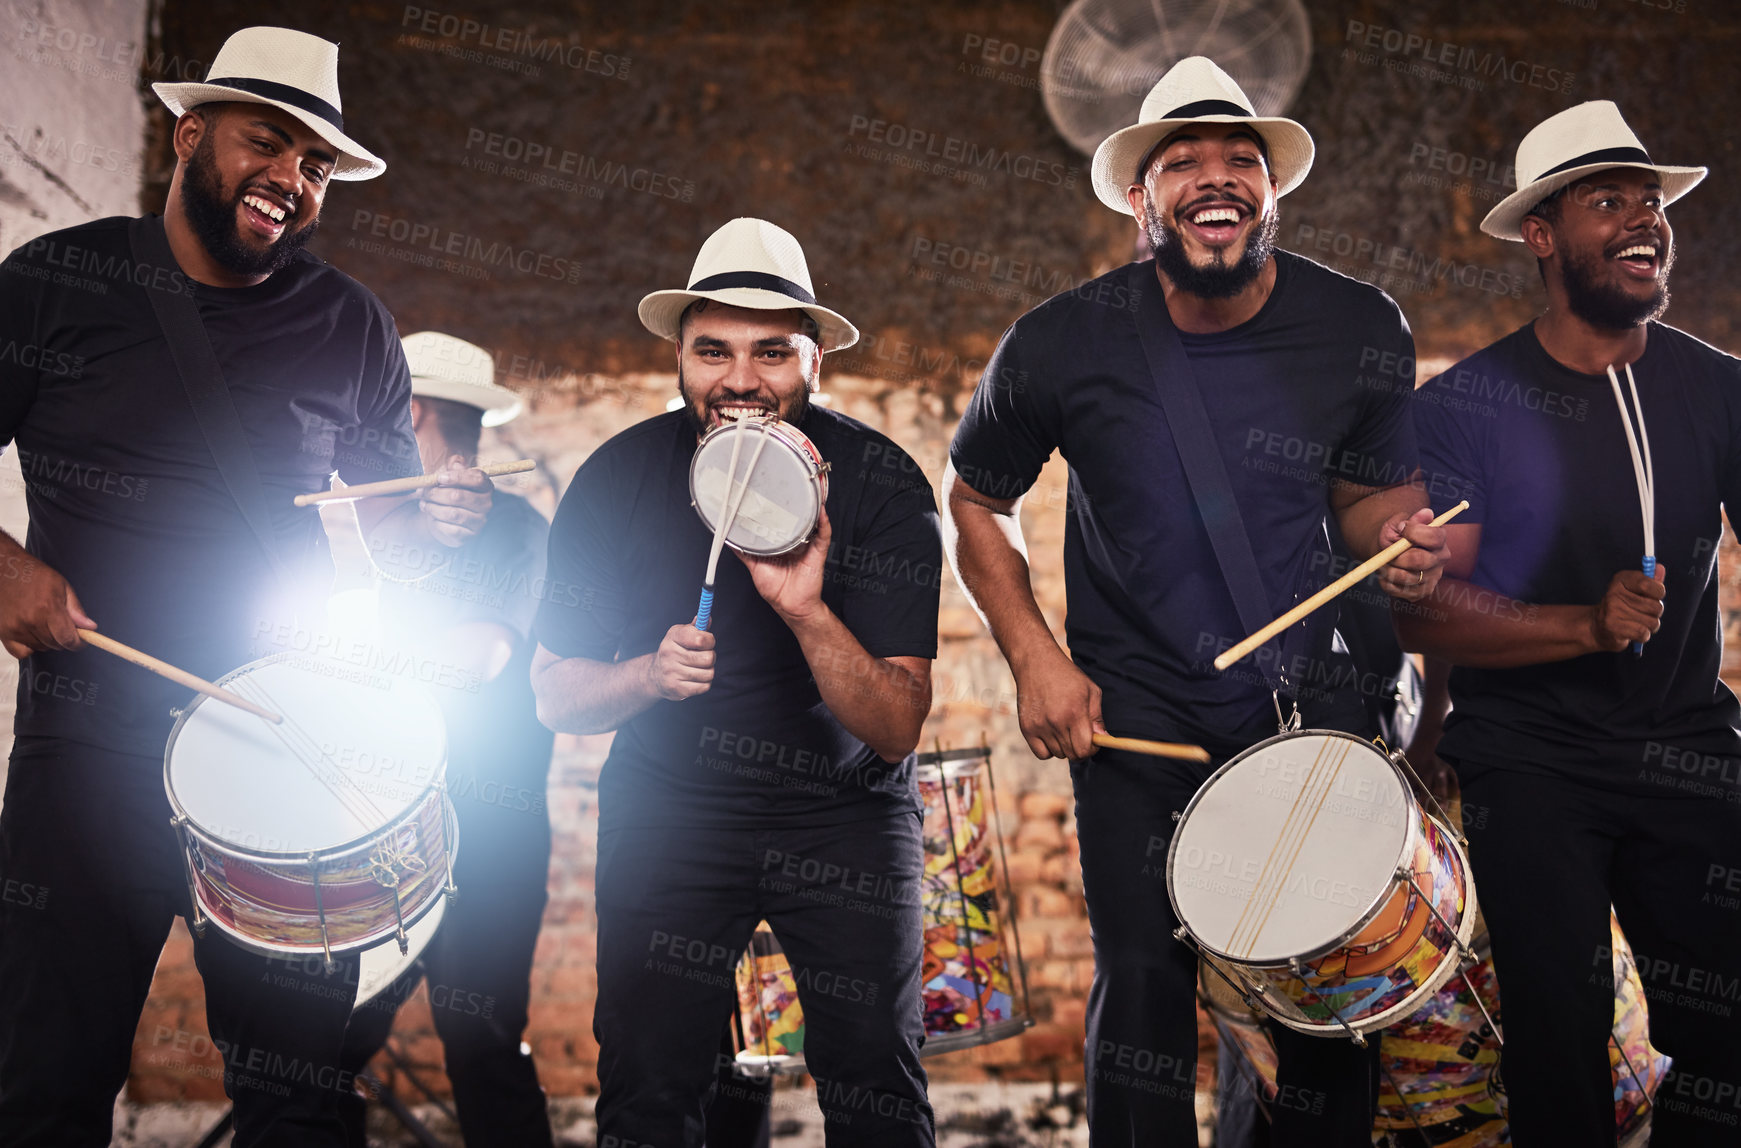 Buy stock photo Portrait of a group of musical performers playing together